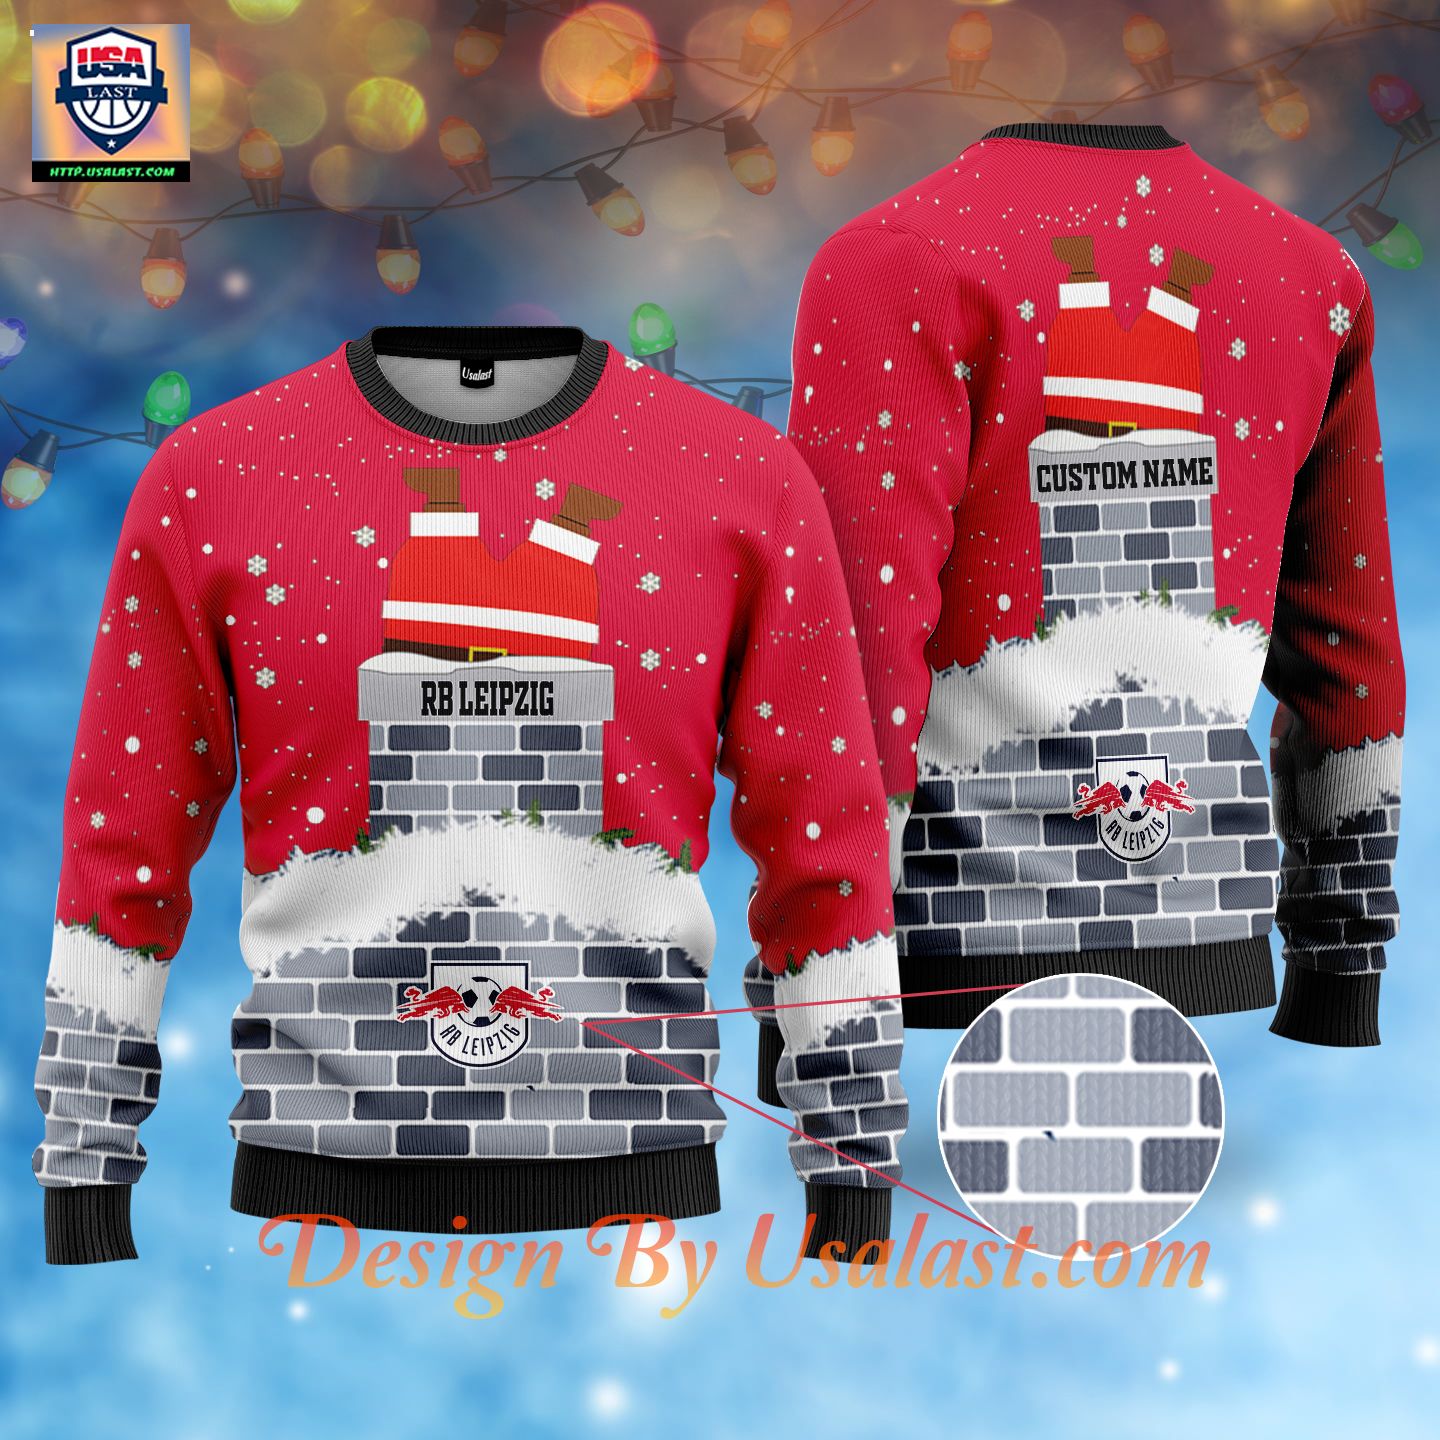 The Great RB Leipzig Custom Name Ugly Christmas Sweater – Red Version